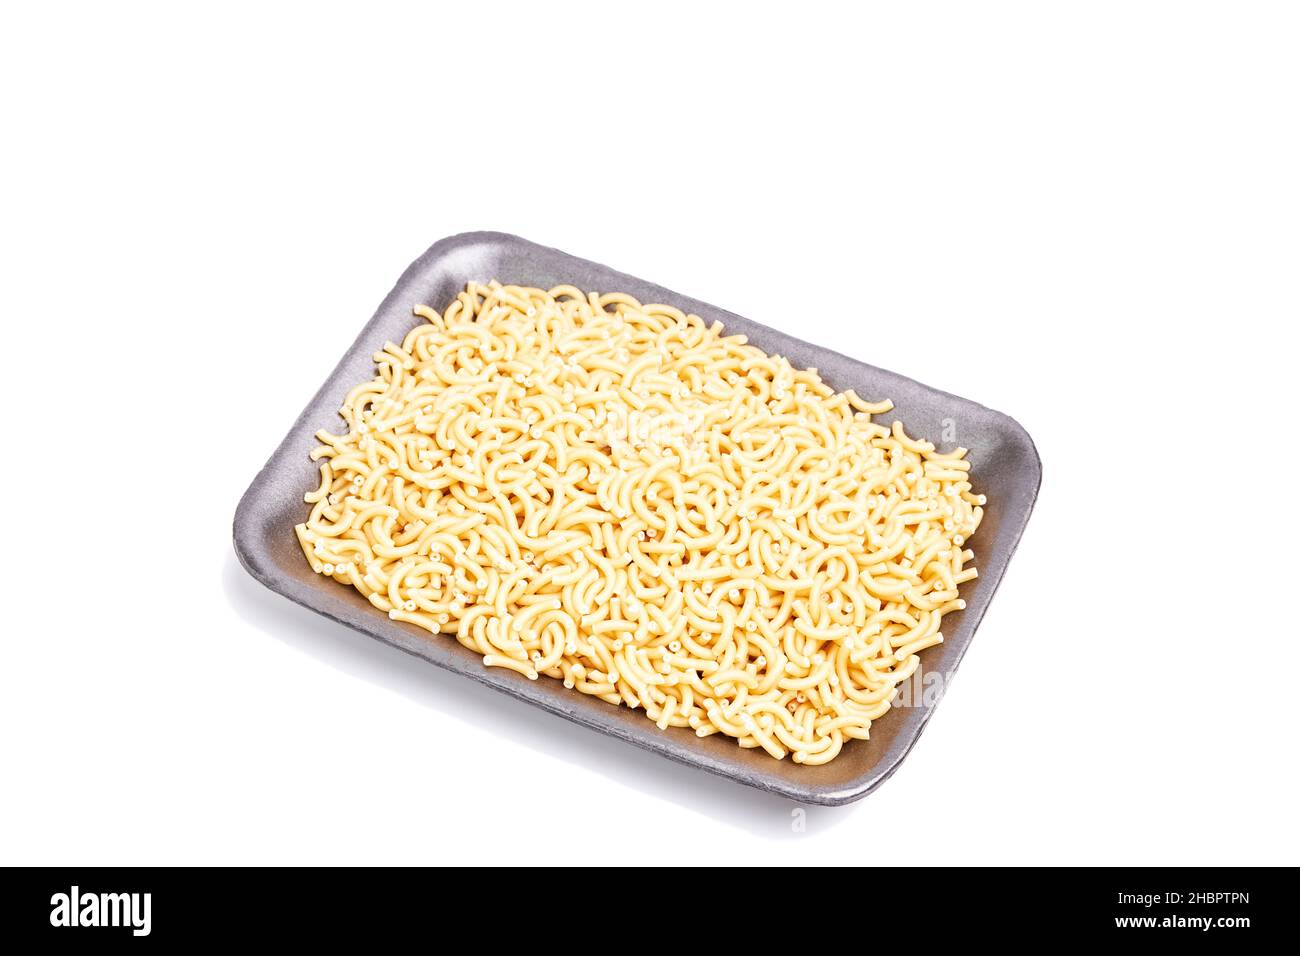 Black tray filled with fideua, pasta, on a white background. Healthy food sales concept Stock Photo